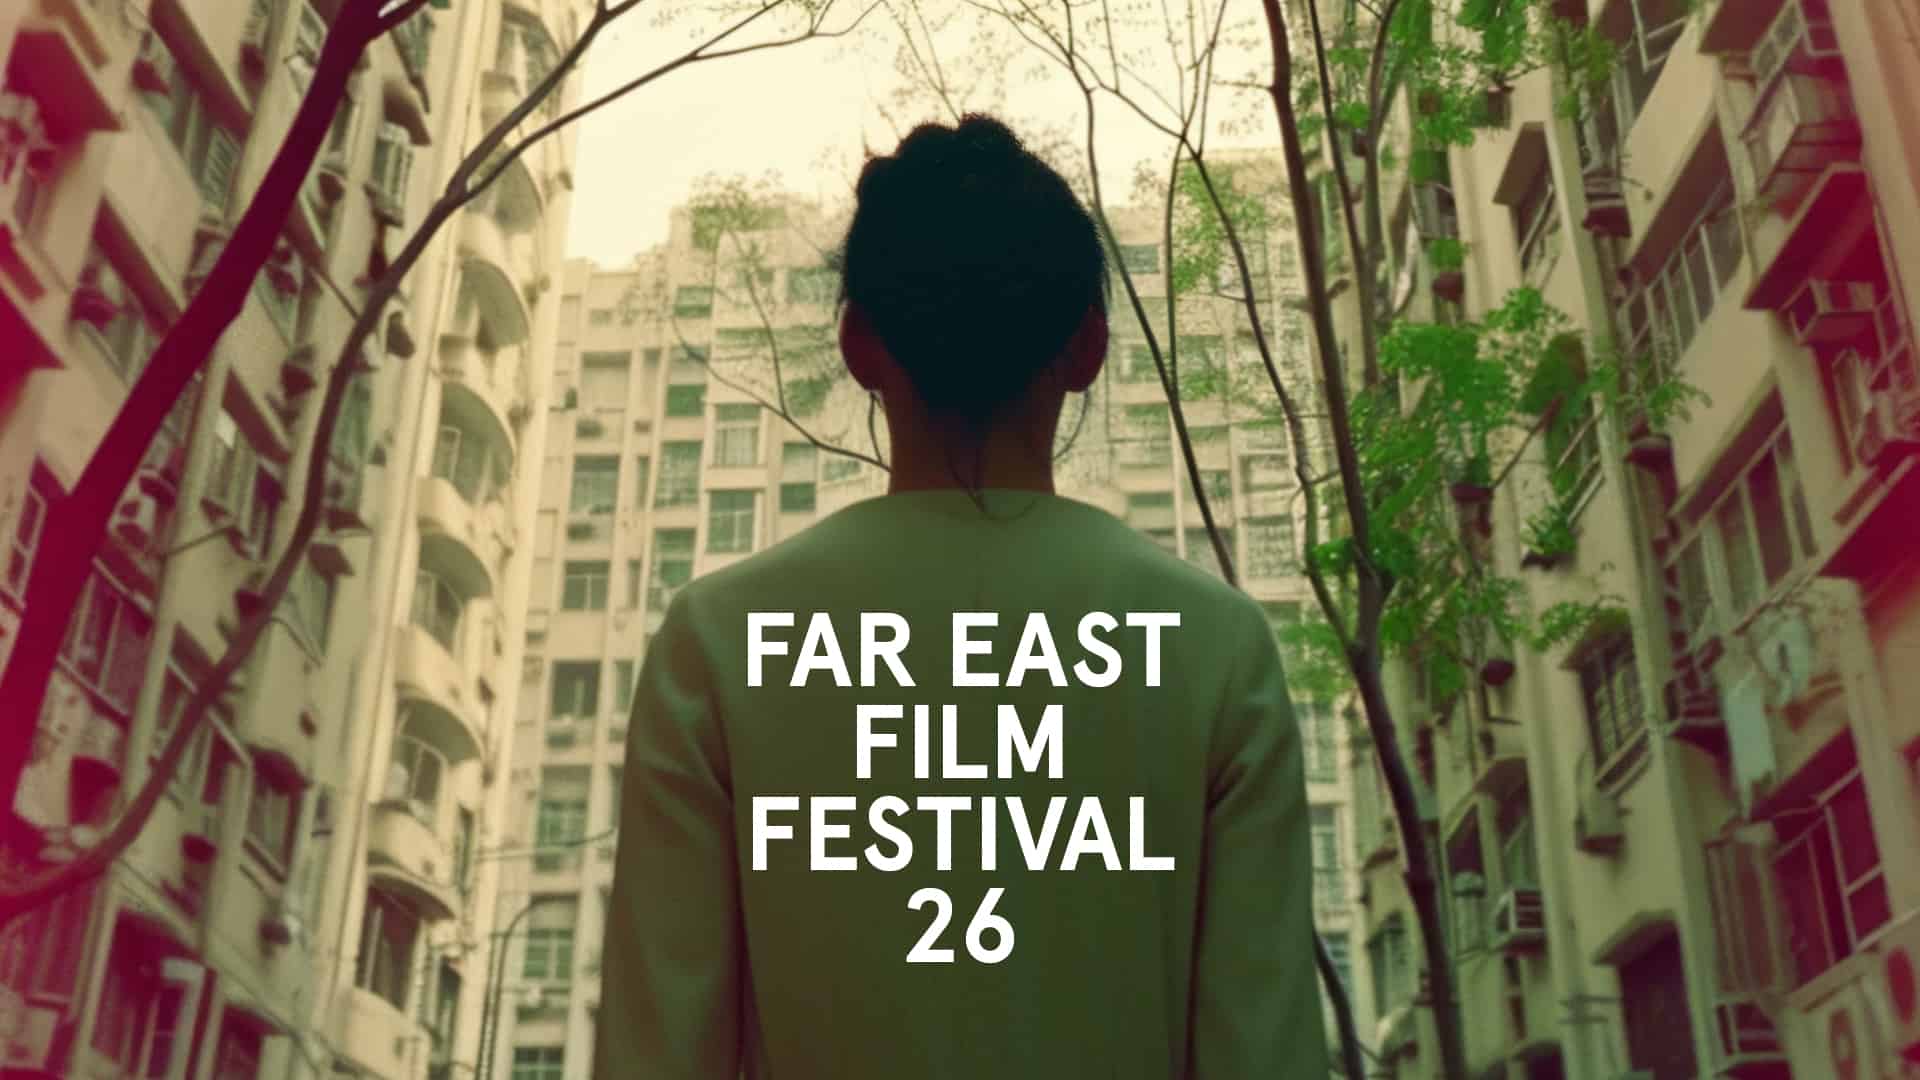 Chinese box Office Sensation "YOLO" Opens the 26th Edition of Udine Far East Film Festival Tonight